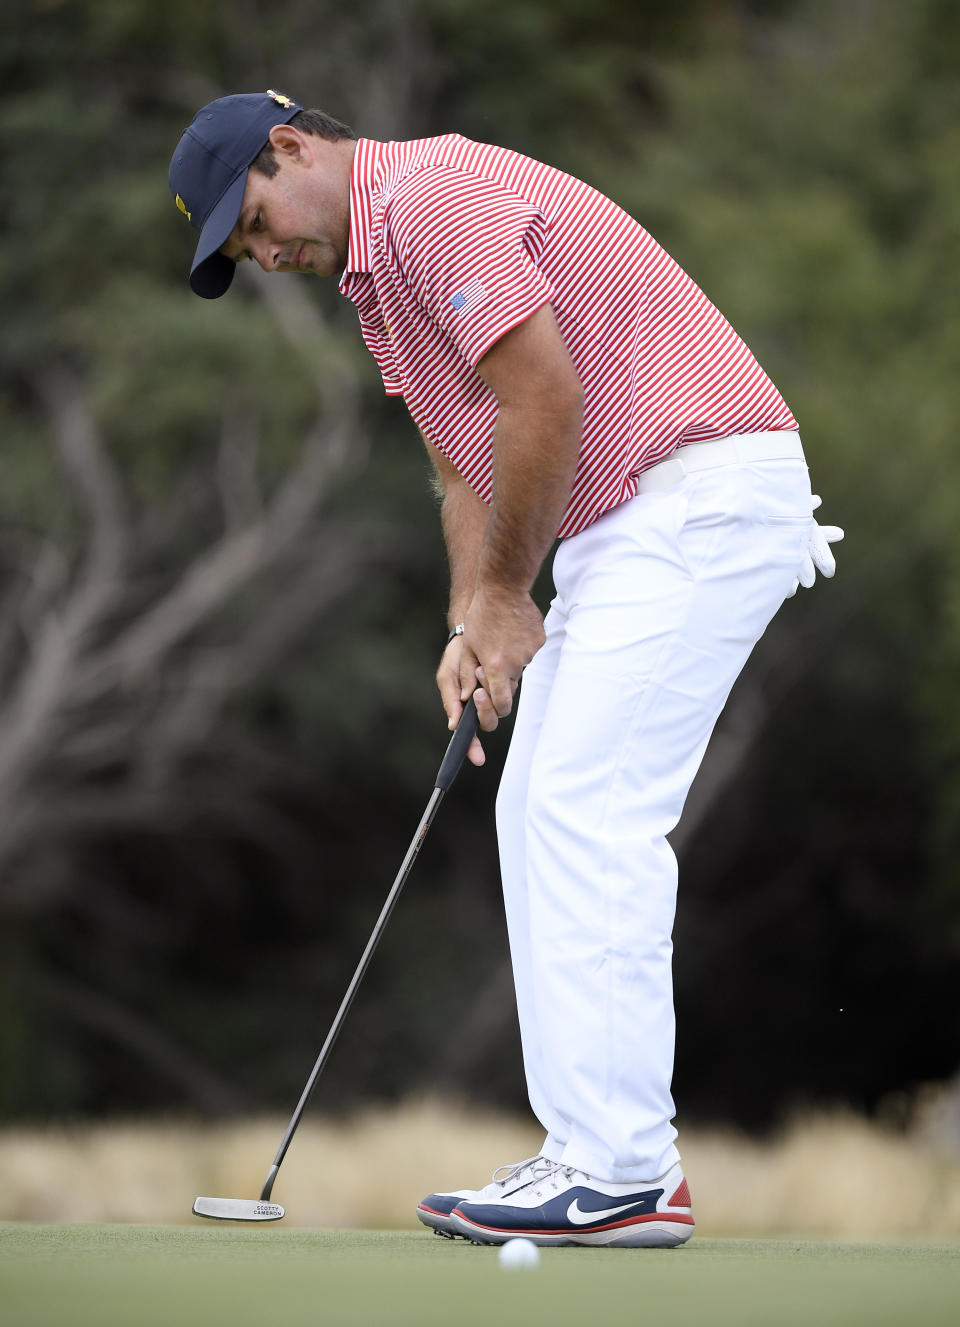 U.S. team player Patrick Reed putts on the 7th green during their fourball match at the Royal Melbourne Golf Club in the opening rounds of the President's Cup golf tournament in Melbourne, Thursday, Dec. 12, 2019. (AP Photo/Andy Brownbill)